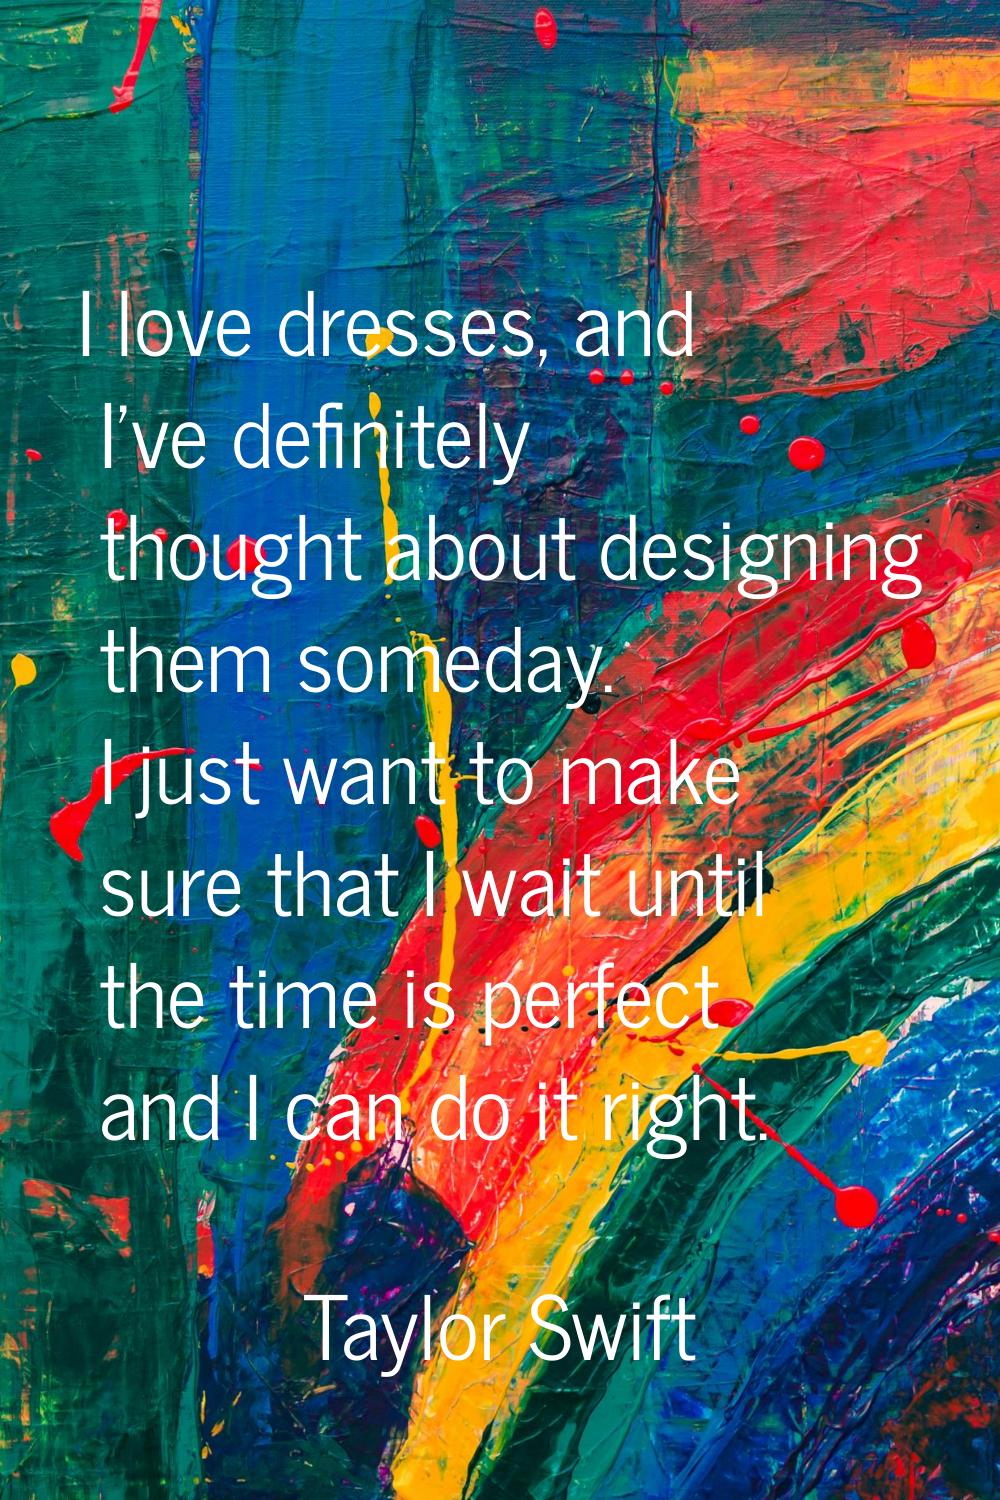 I love dresses, and I've definitely thought about designing them someday. I just want to make sure 